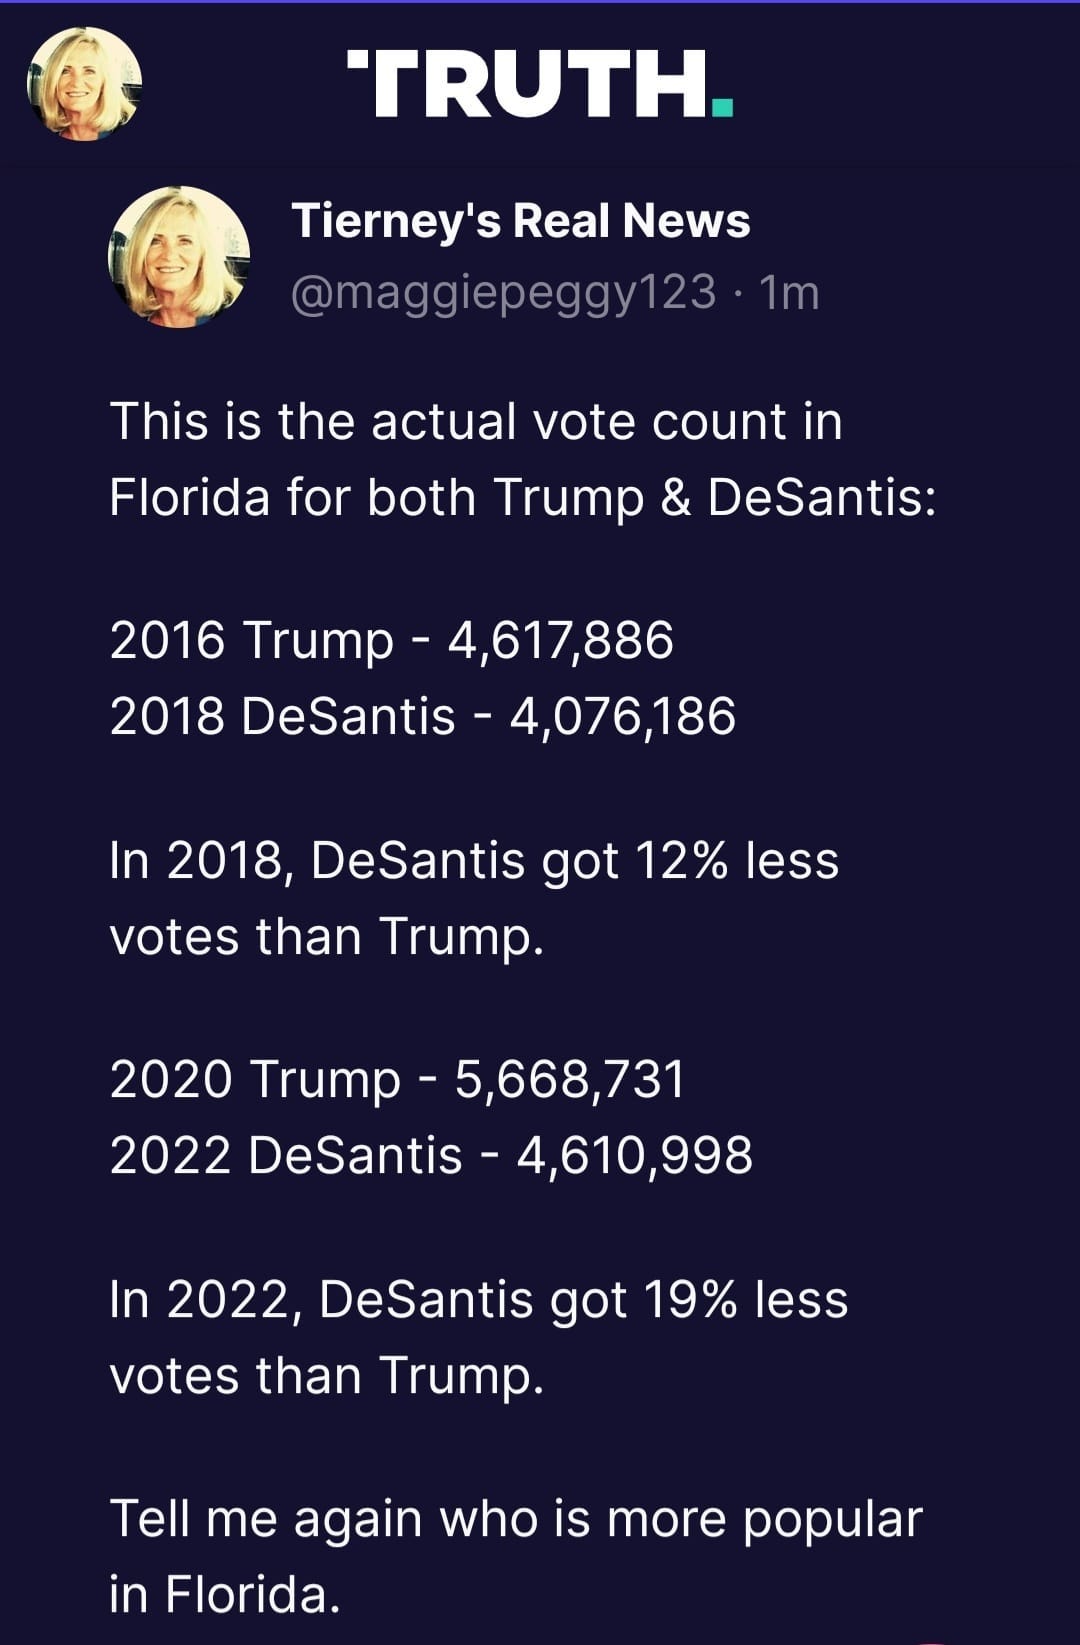 May be an image of 2 people and text that says 'TRUTH. Tierney's Real News @maggiepeggy123 1m This is the actual vote count in Florida for both Trump & DeSantis: 2016 Trump 4,617,886 2018 DeSantis 4,076,186 In 2018, DeSantis got 12% less votes than Trump. 2020 Trump 5,668,731 2022 DeSantis 4,610,998 In 2022, DeSantis got 19% less votes than Trump. Tell me again who is more popular in Florida.'